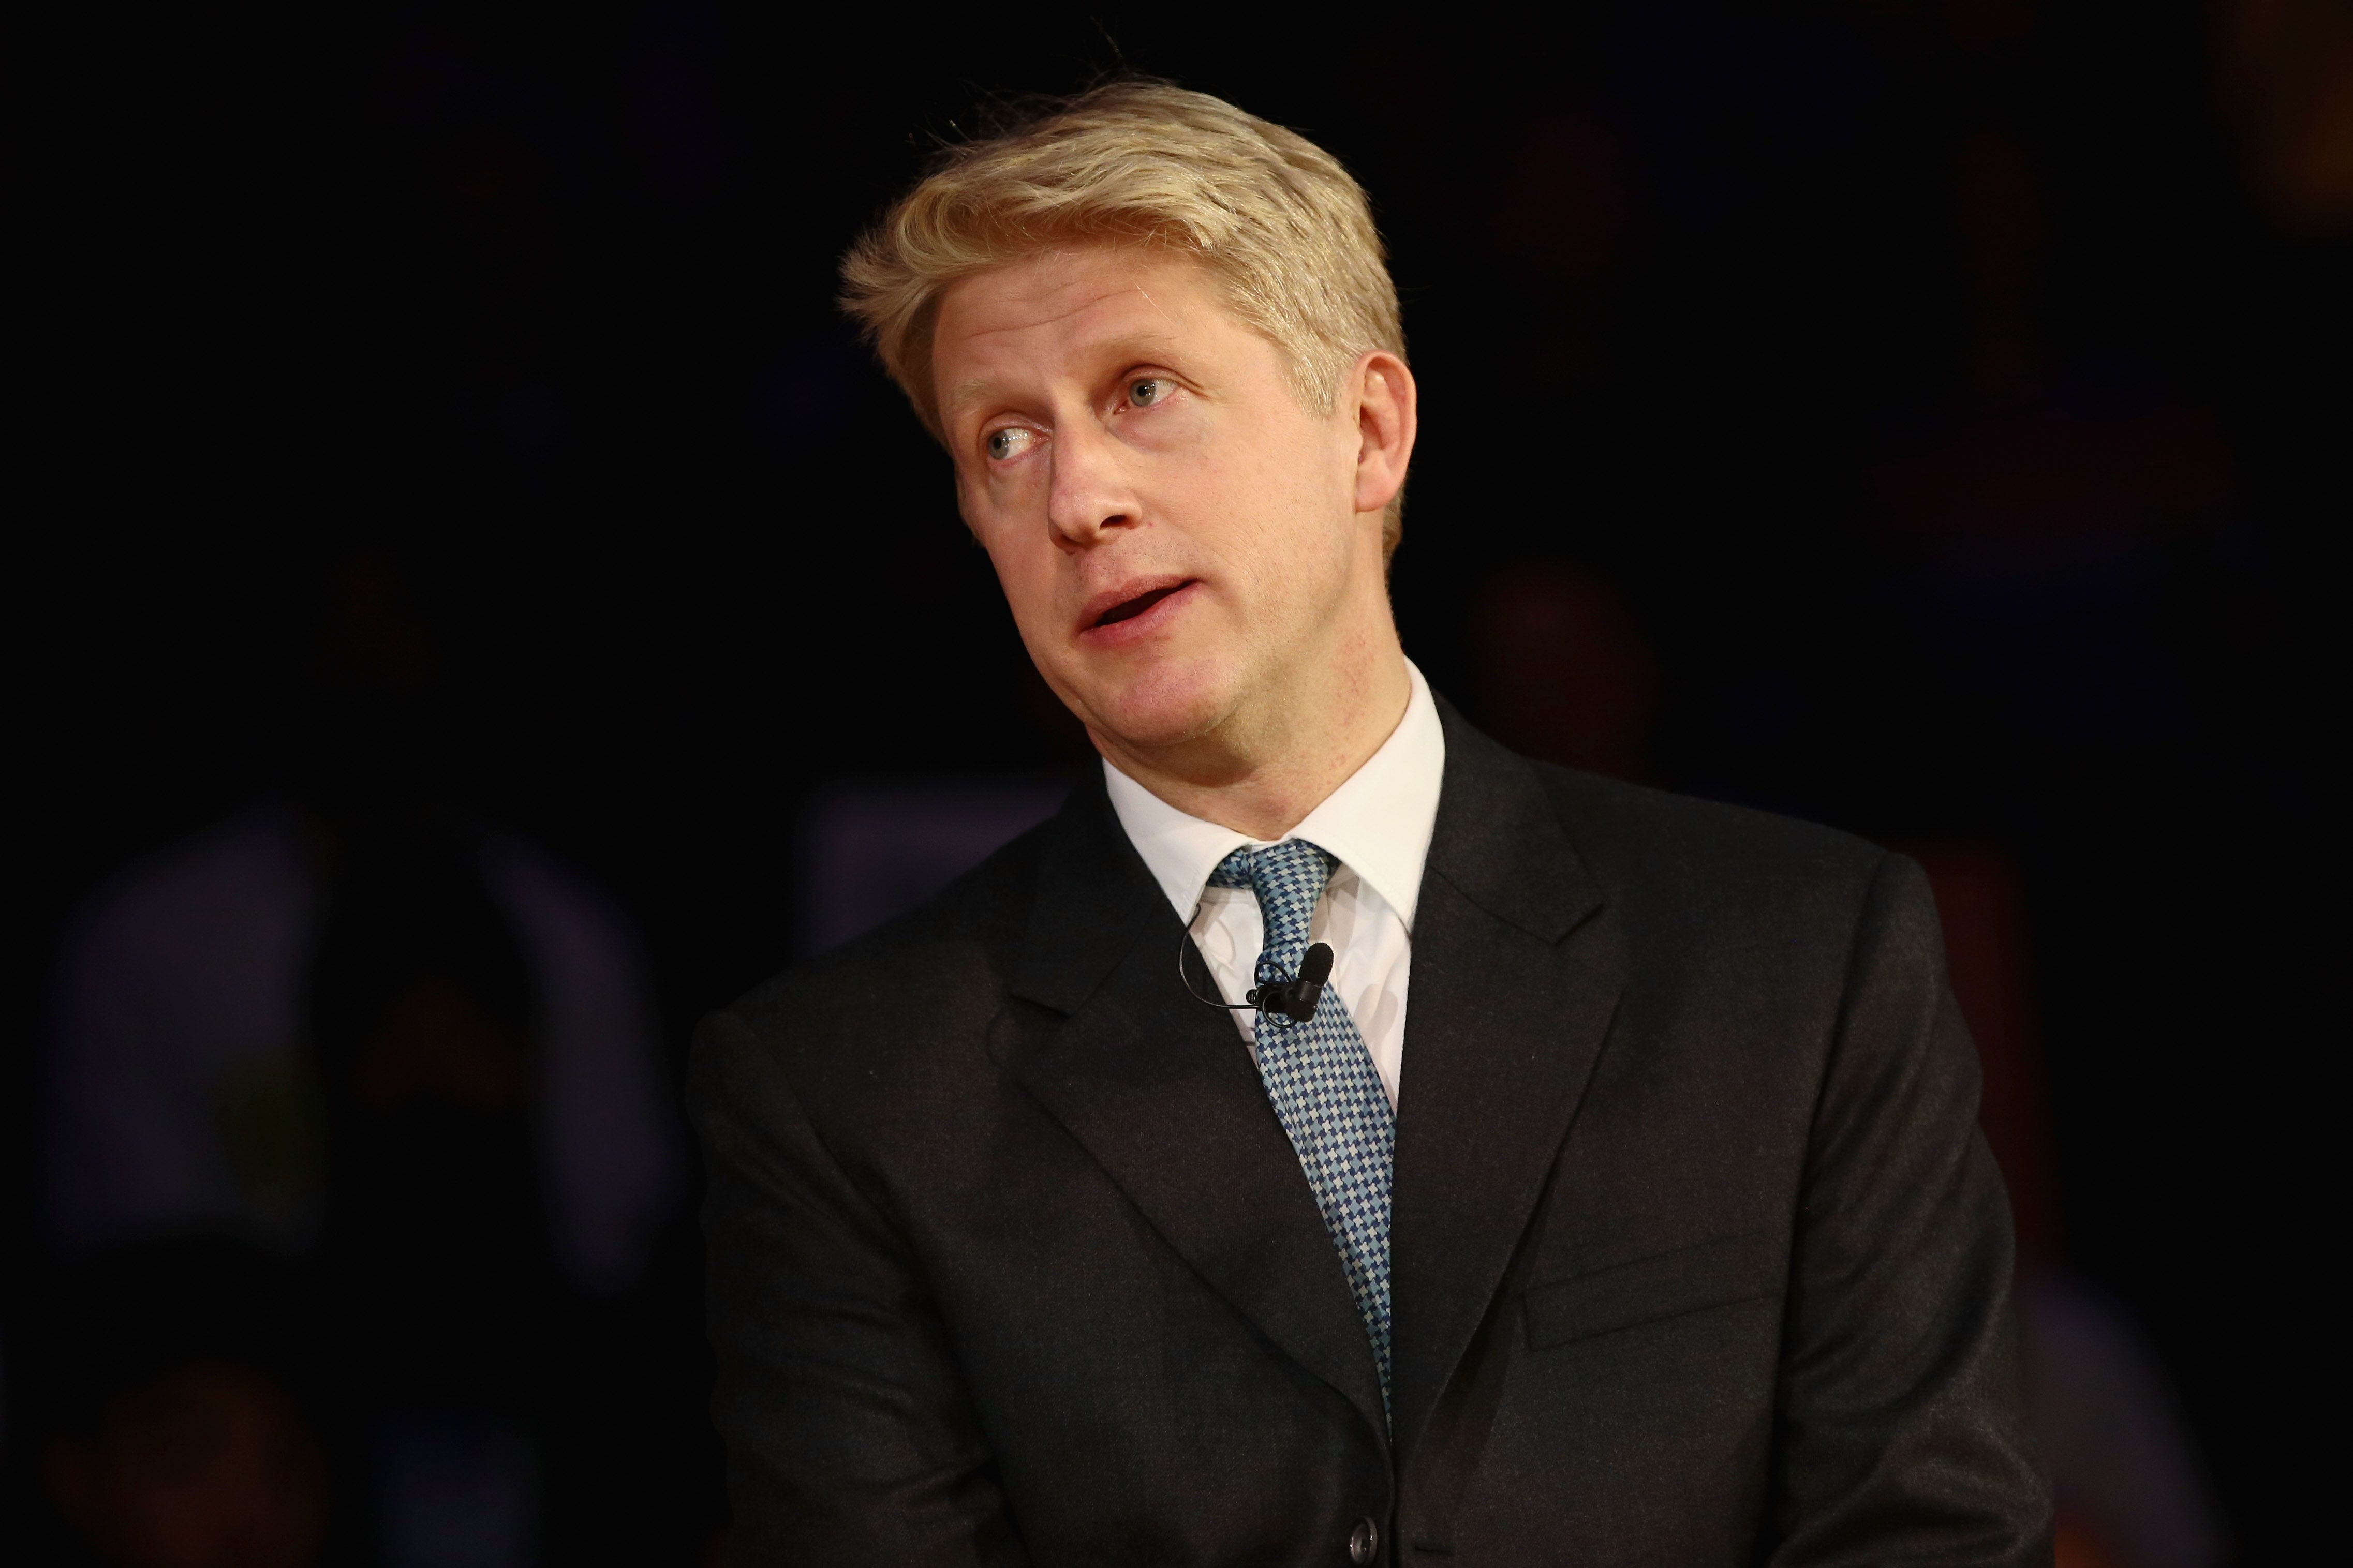 LONDON, ENGLAND - NOVEMBER 14: Secretary of State for Transport Jo Johnson speaks onstage during a pro-remain a rally rejecting the the Prime Minister's Brexit deal on November 14, 2018 in London, England. Anti-Brexit groups 'Best for Britain' and 'The People's Vote Campaign' are holding a joint rally tonight to call on MPs to say they are not buying the Prime Minister's Brexit deal. (Photo by Jack Taylor/Getty Images)